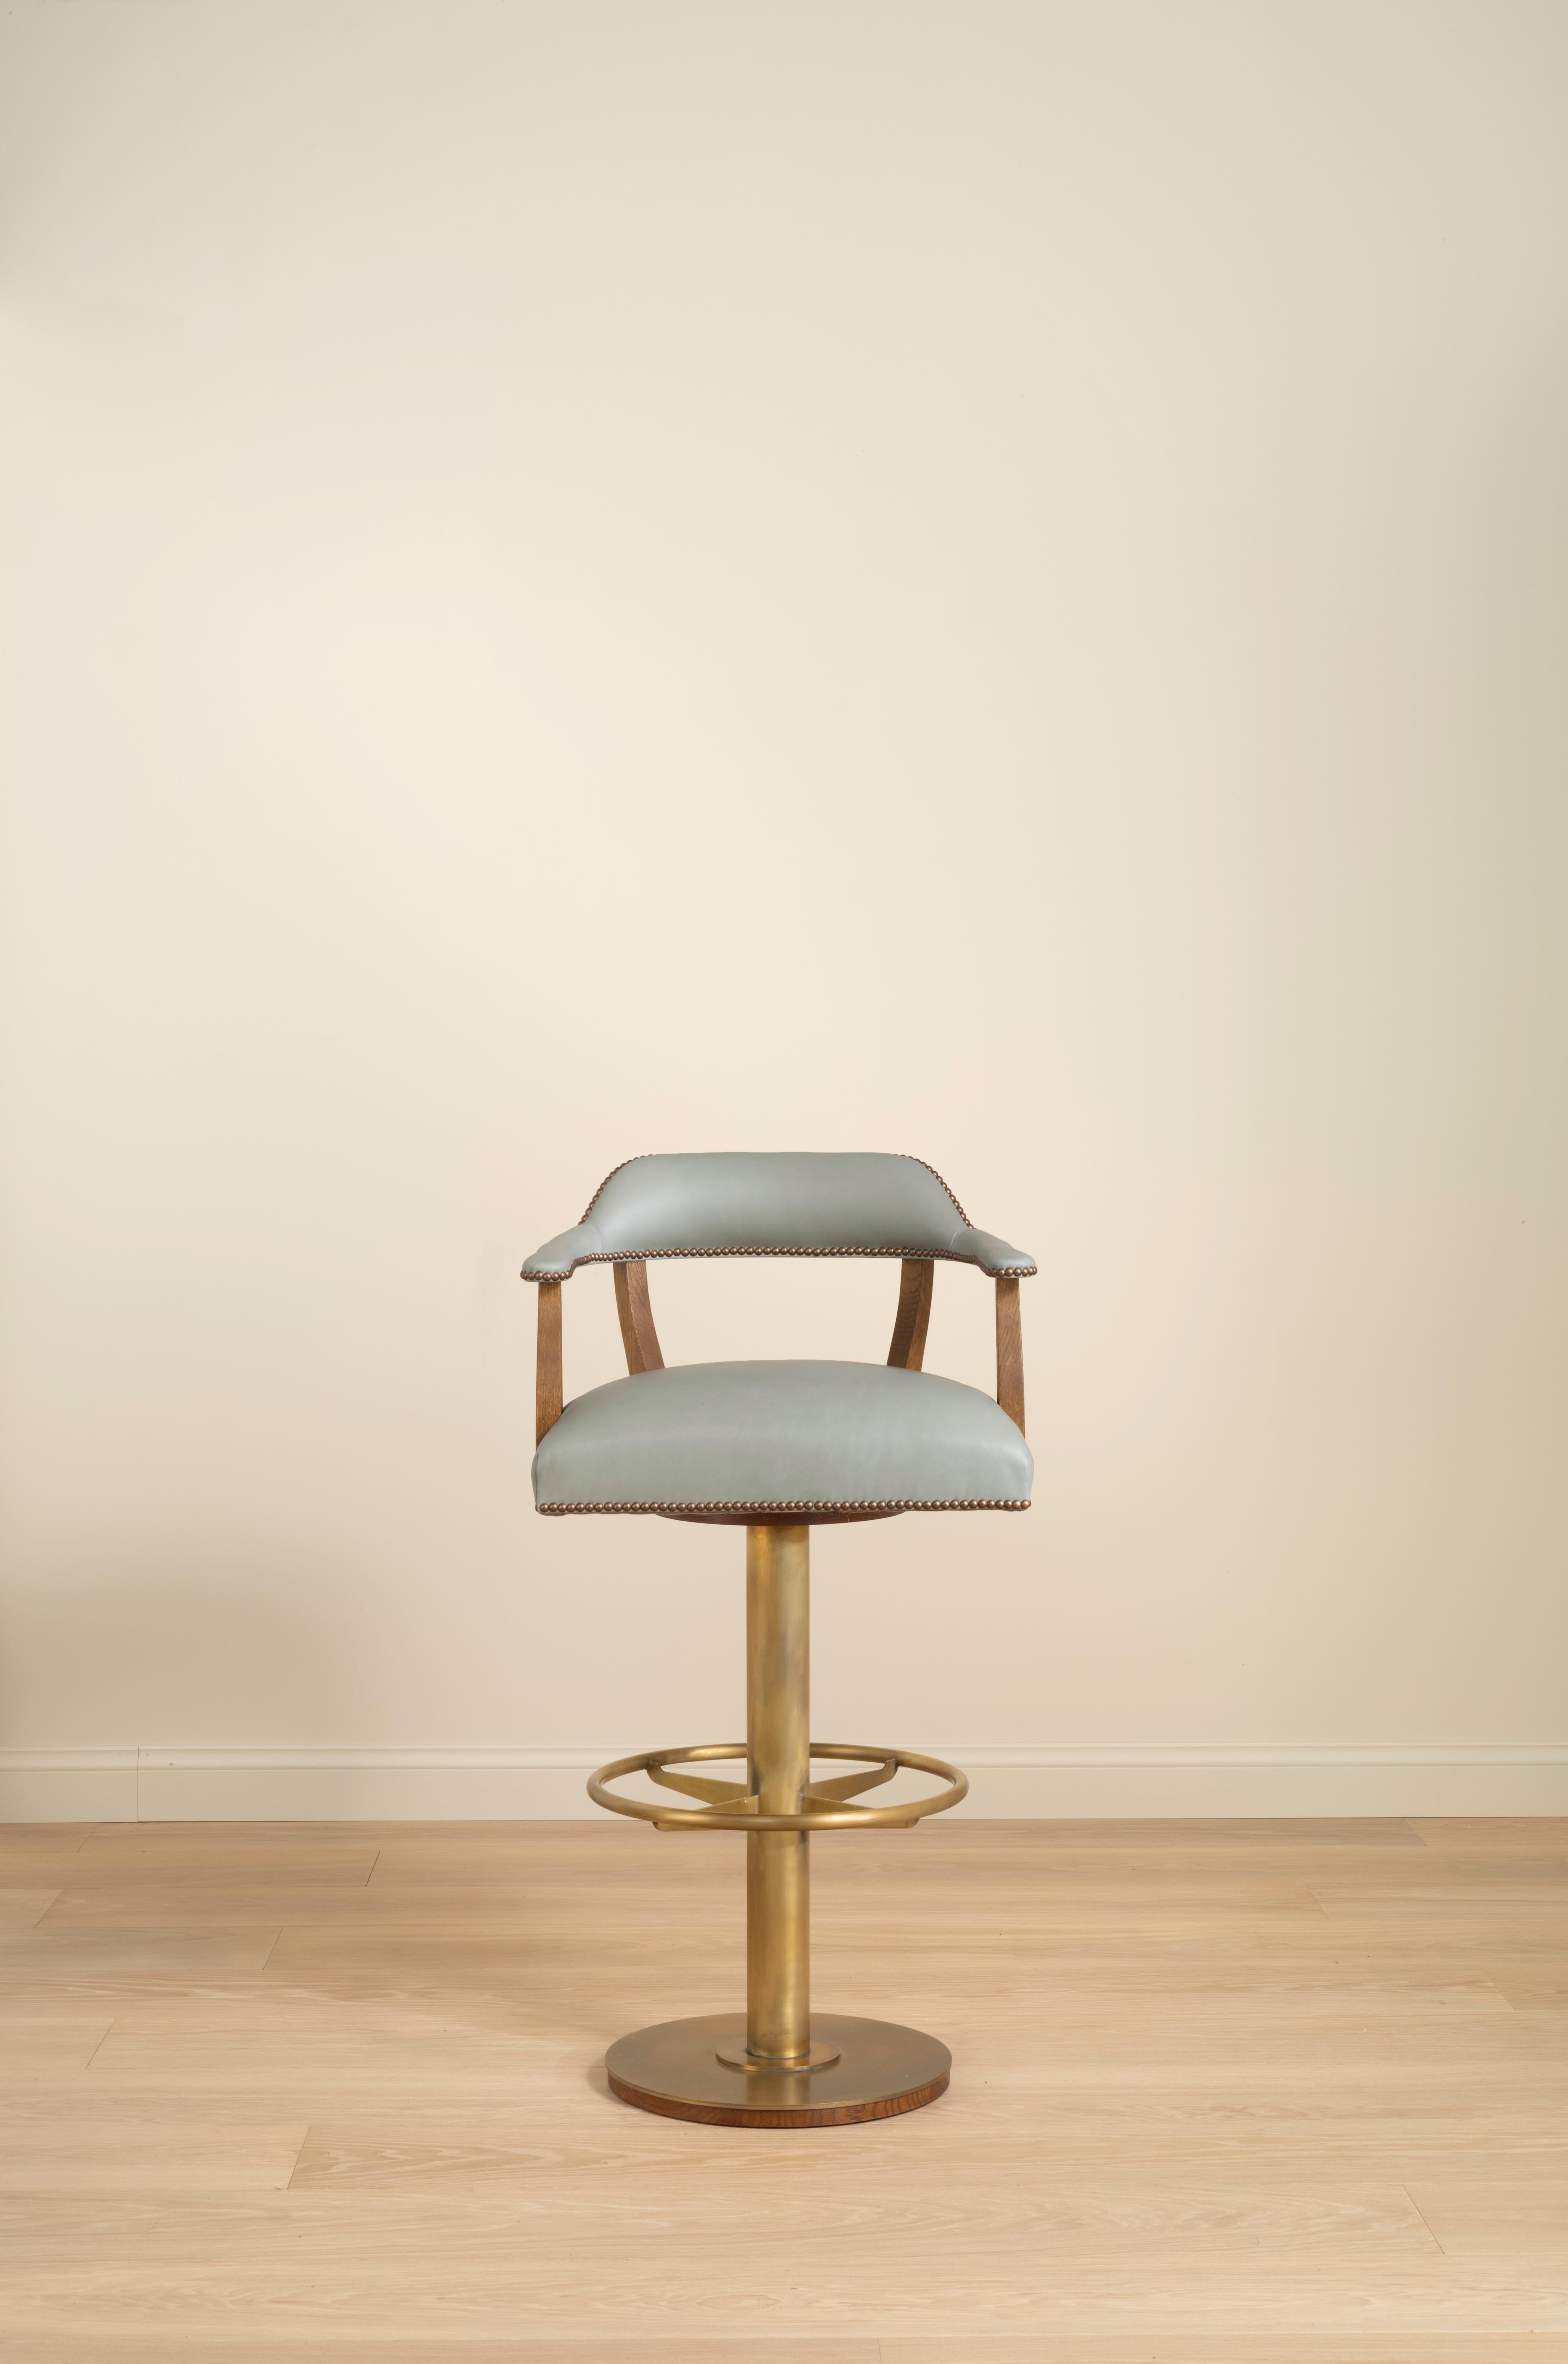 Inspired by our Croft chair, the Croft Barstool was created to give the design versatility, allowing the sophistication of its finishes and bespoke upholstery to move seamlessly between the dining room into the bar. Featuring a bespoke swivel